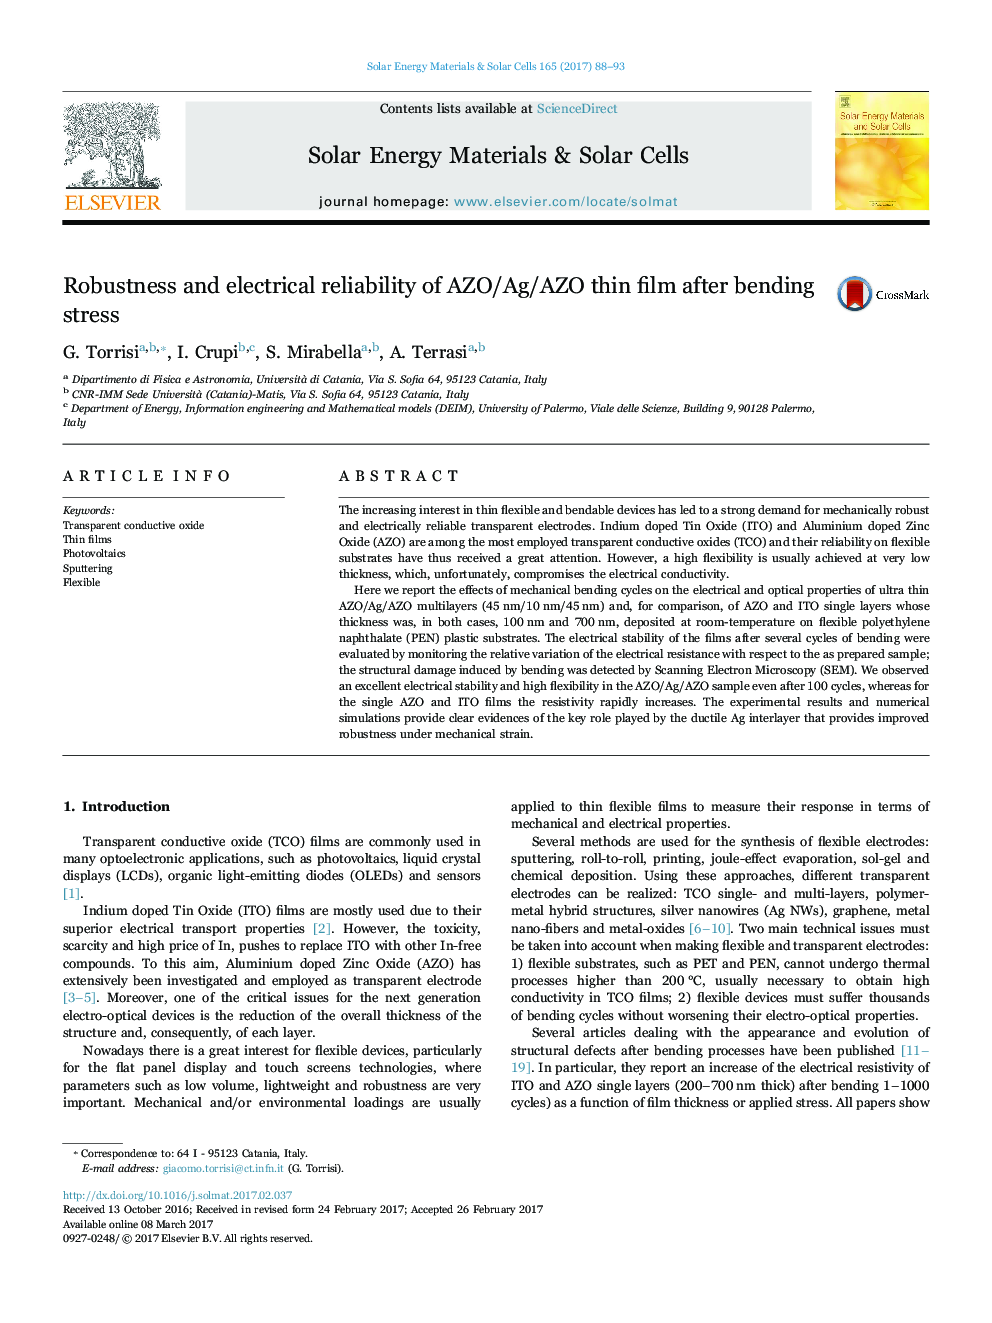 Robustness and electrical reliability of AZO/Ag/AZO thin film after bending stress